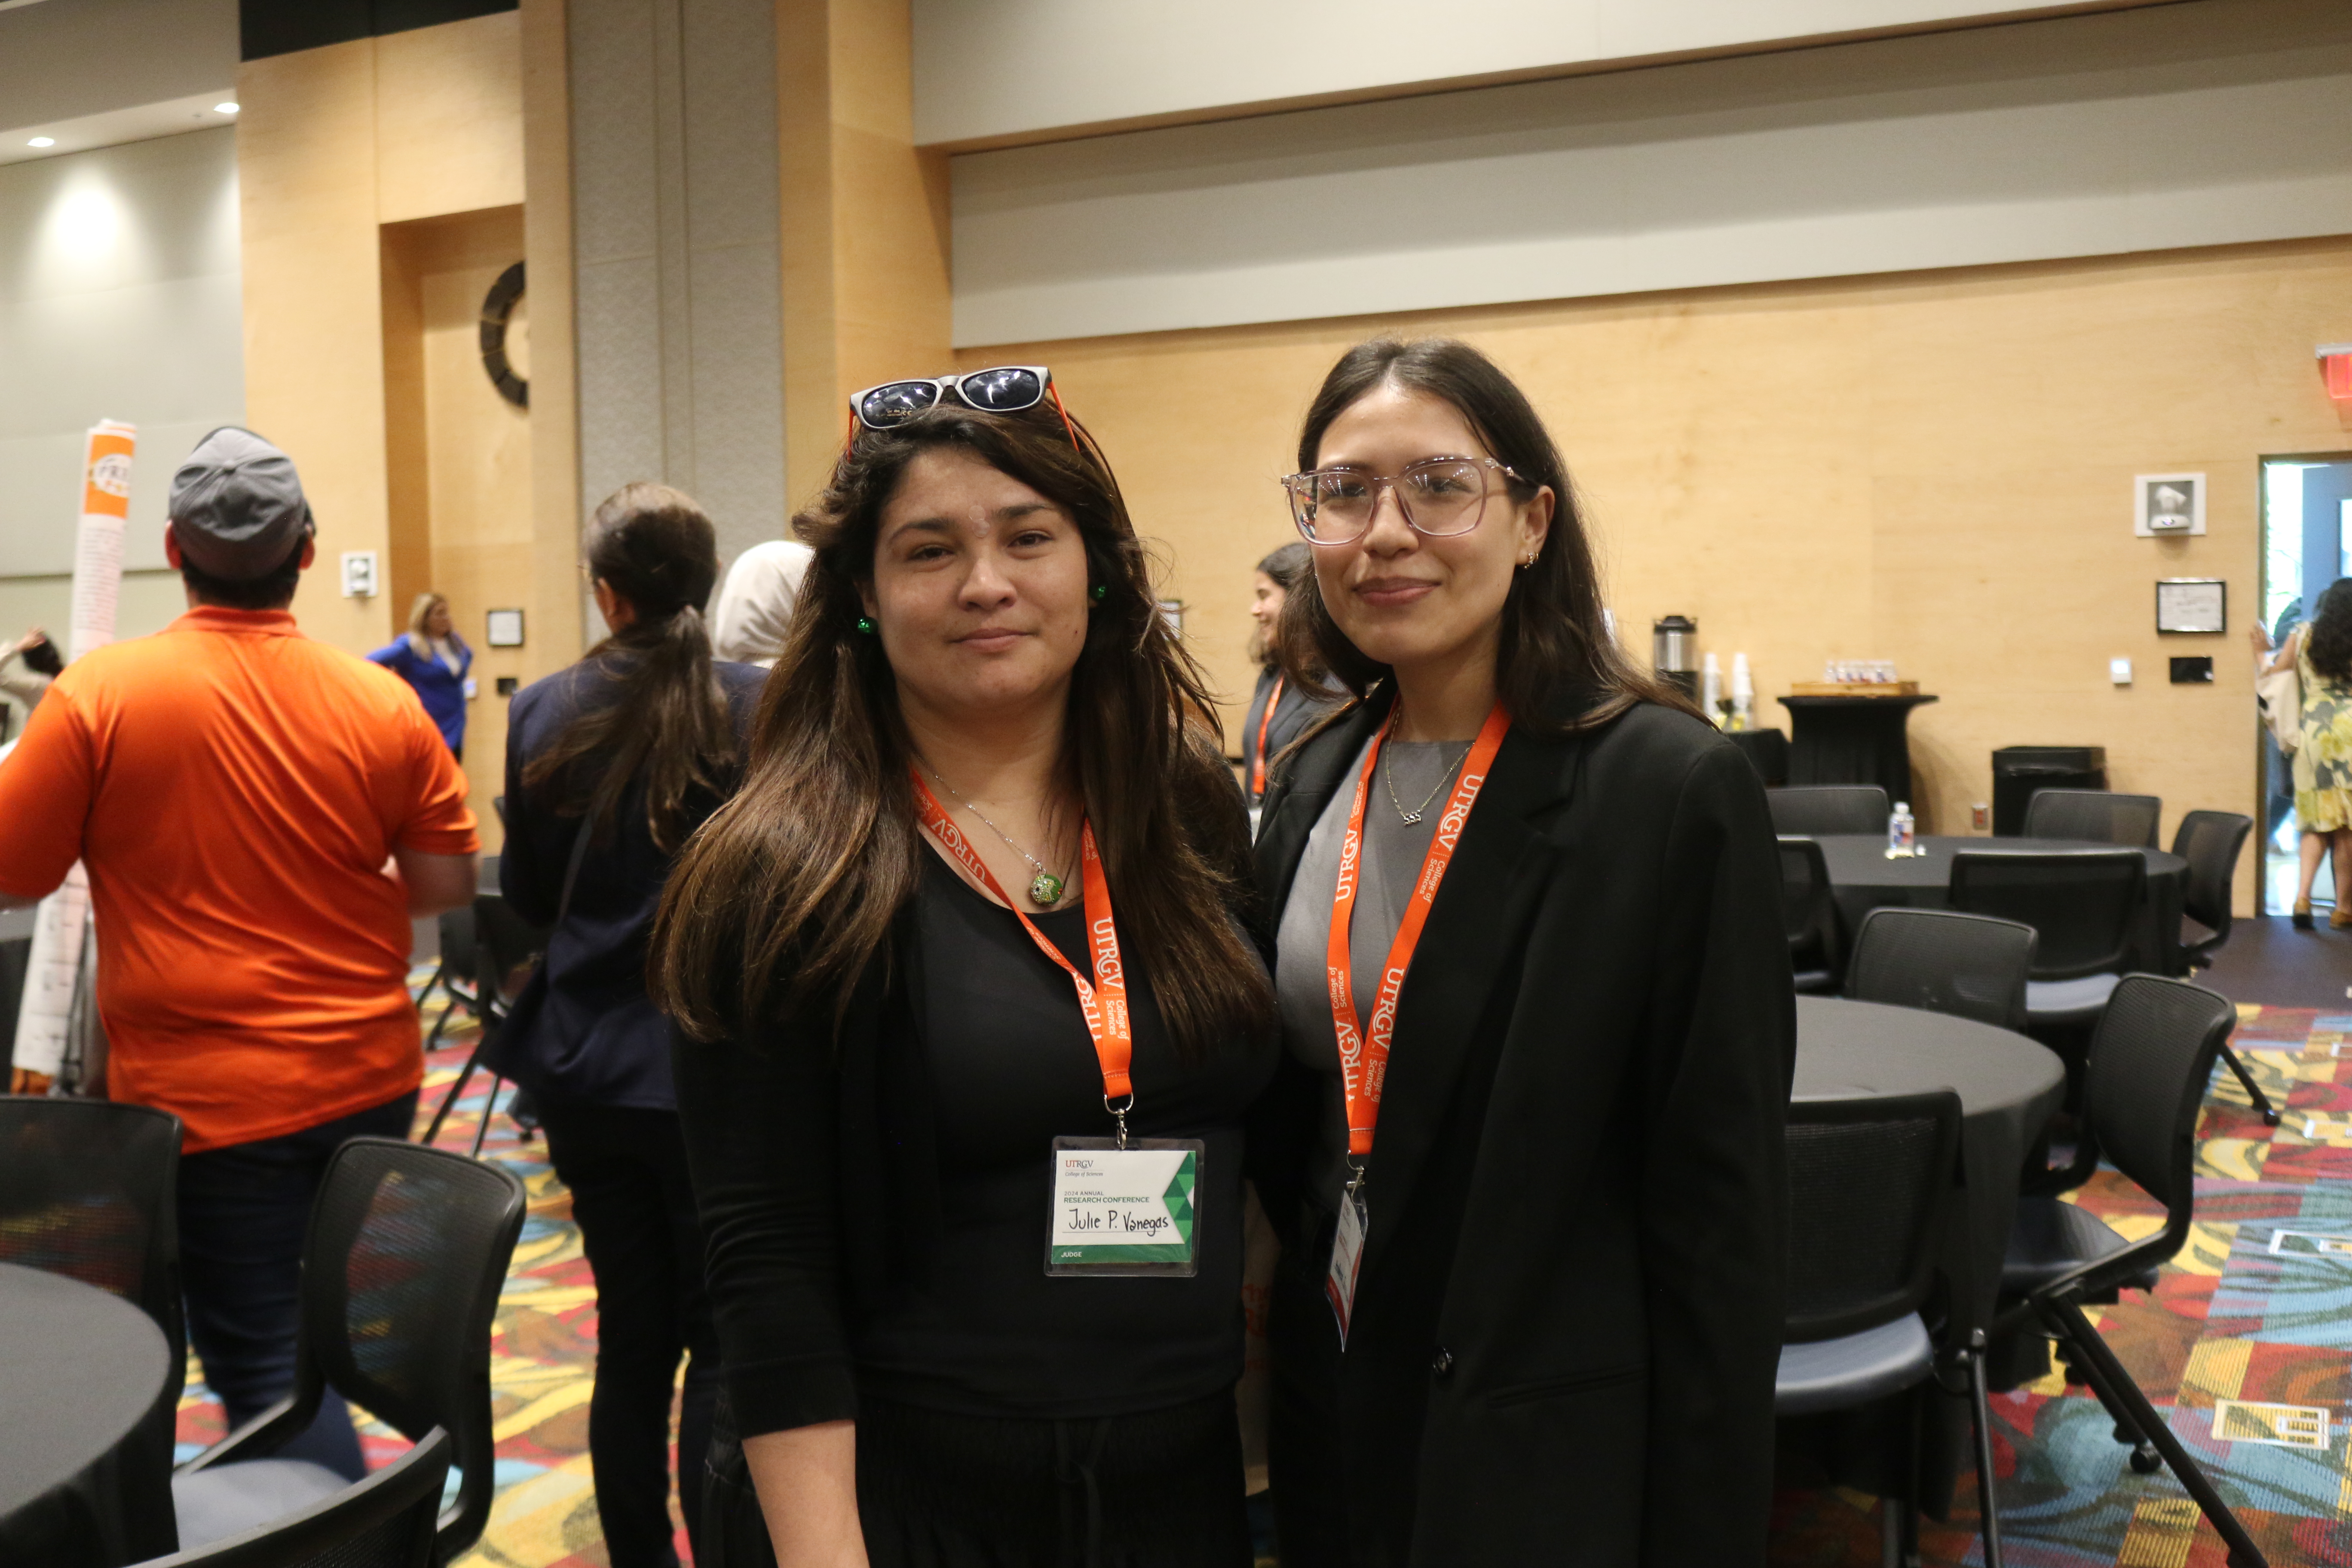 Dr. Julie Vanegas and Andrea Quezada at the Annual Research Conference